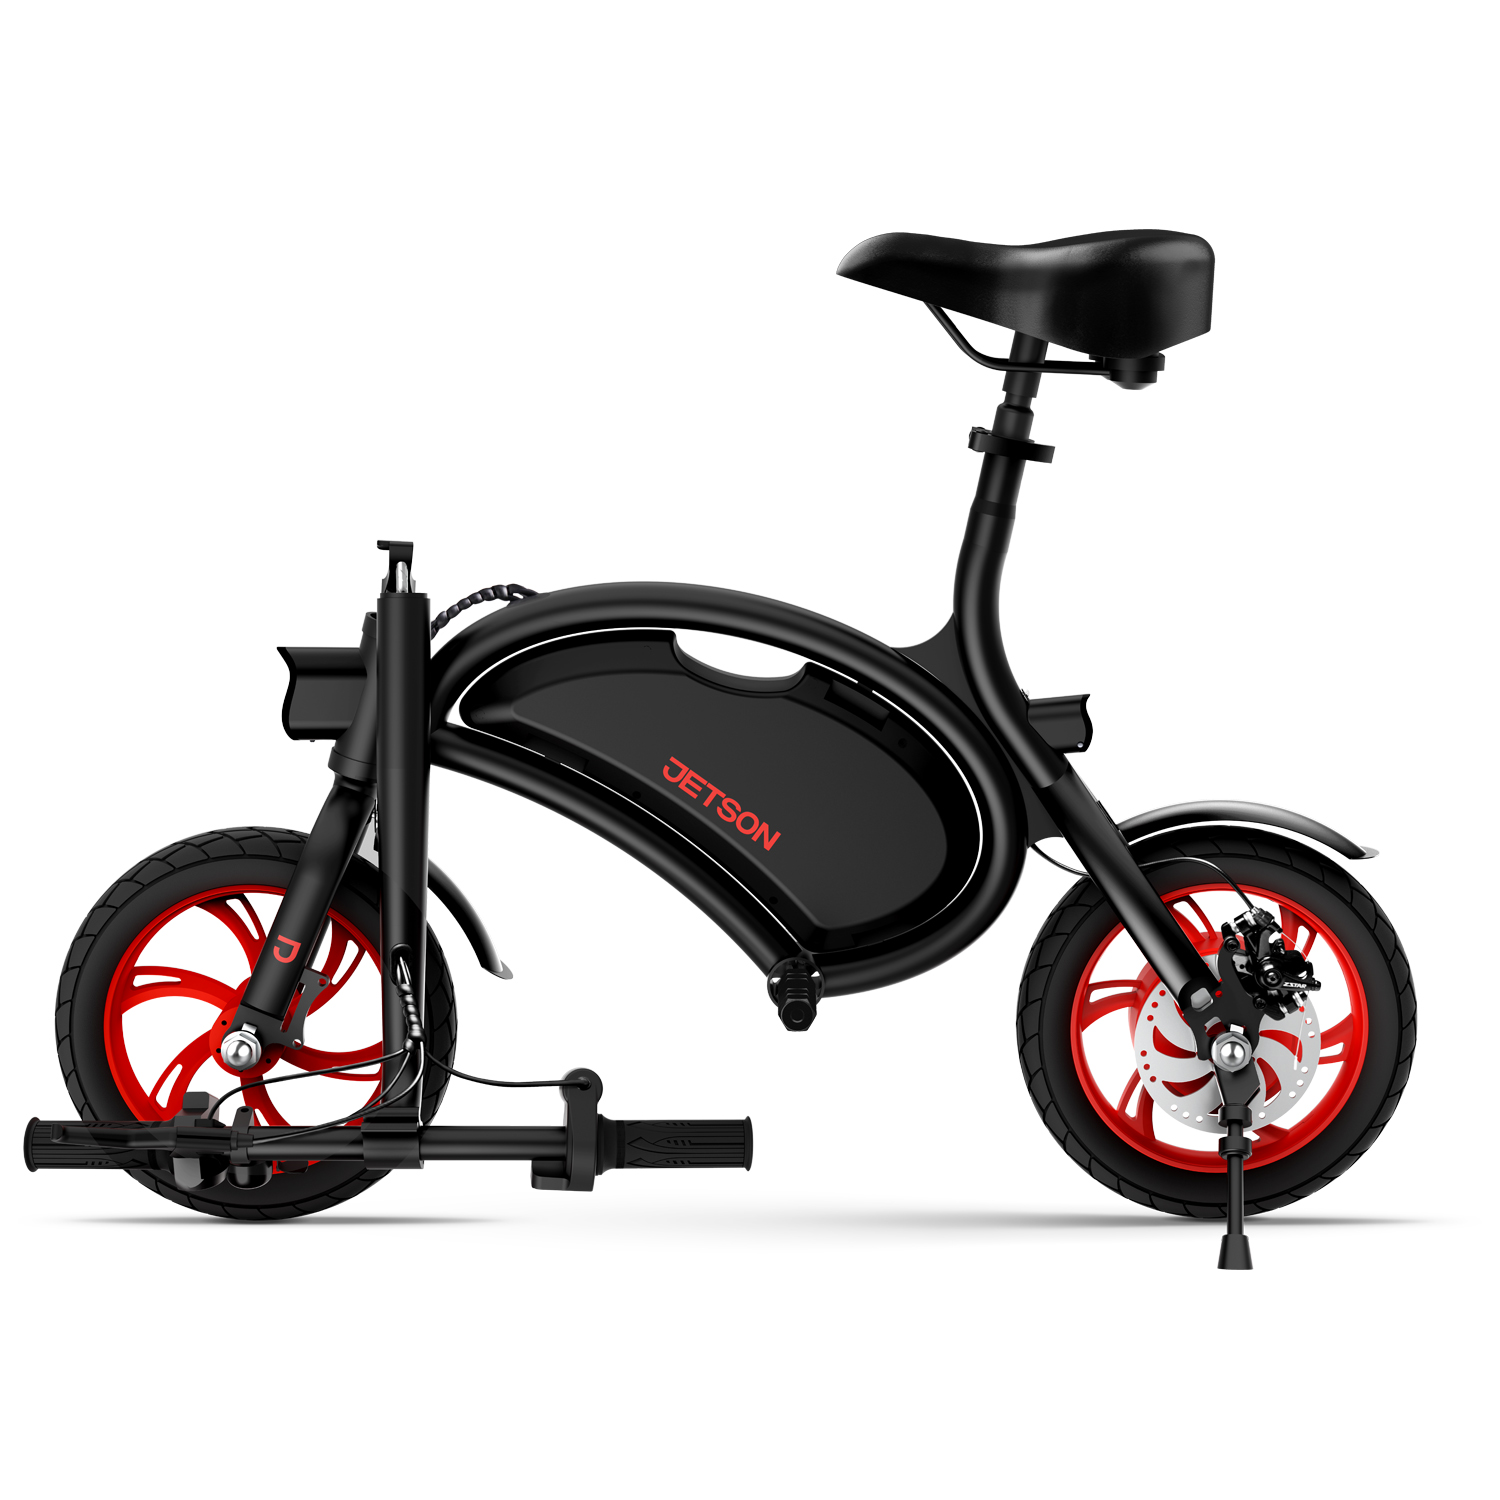 Jetson Bolt Folding Electric Ride-On with Twist Throttle, Cruise Control, Up to 15.5 mph, Black - image 7 of 17